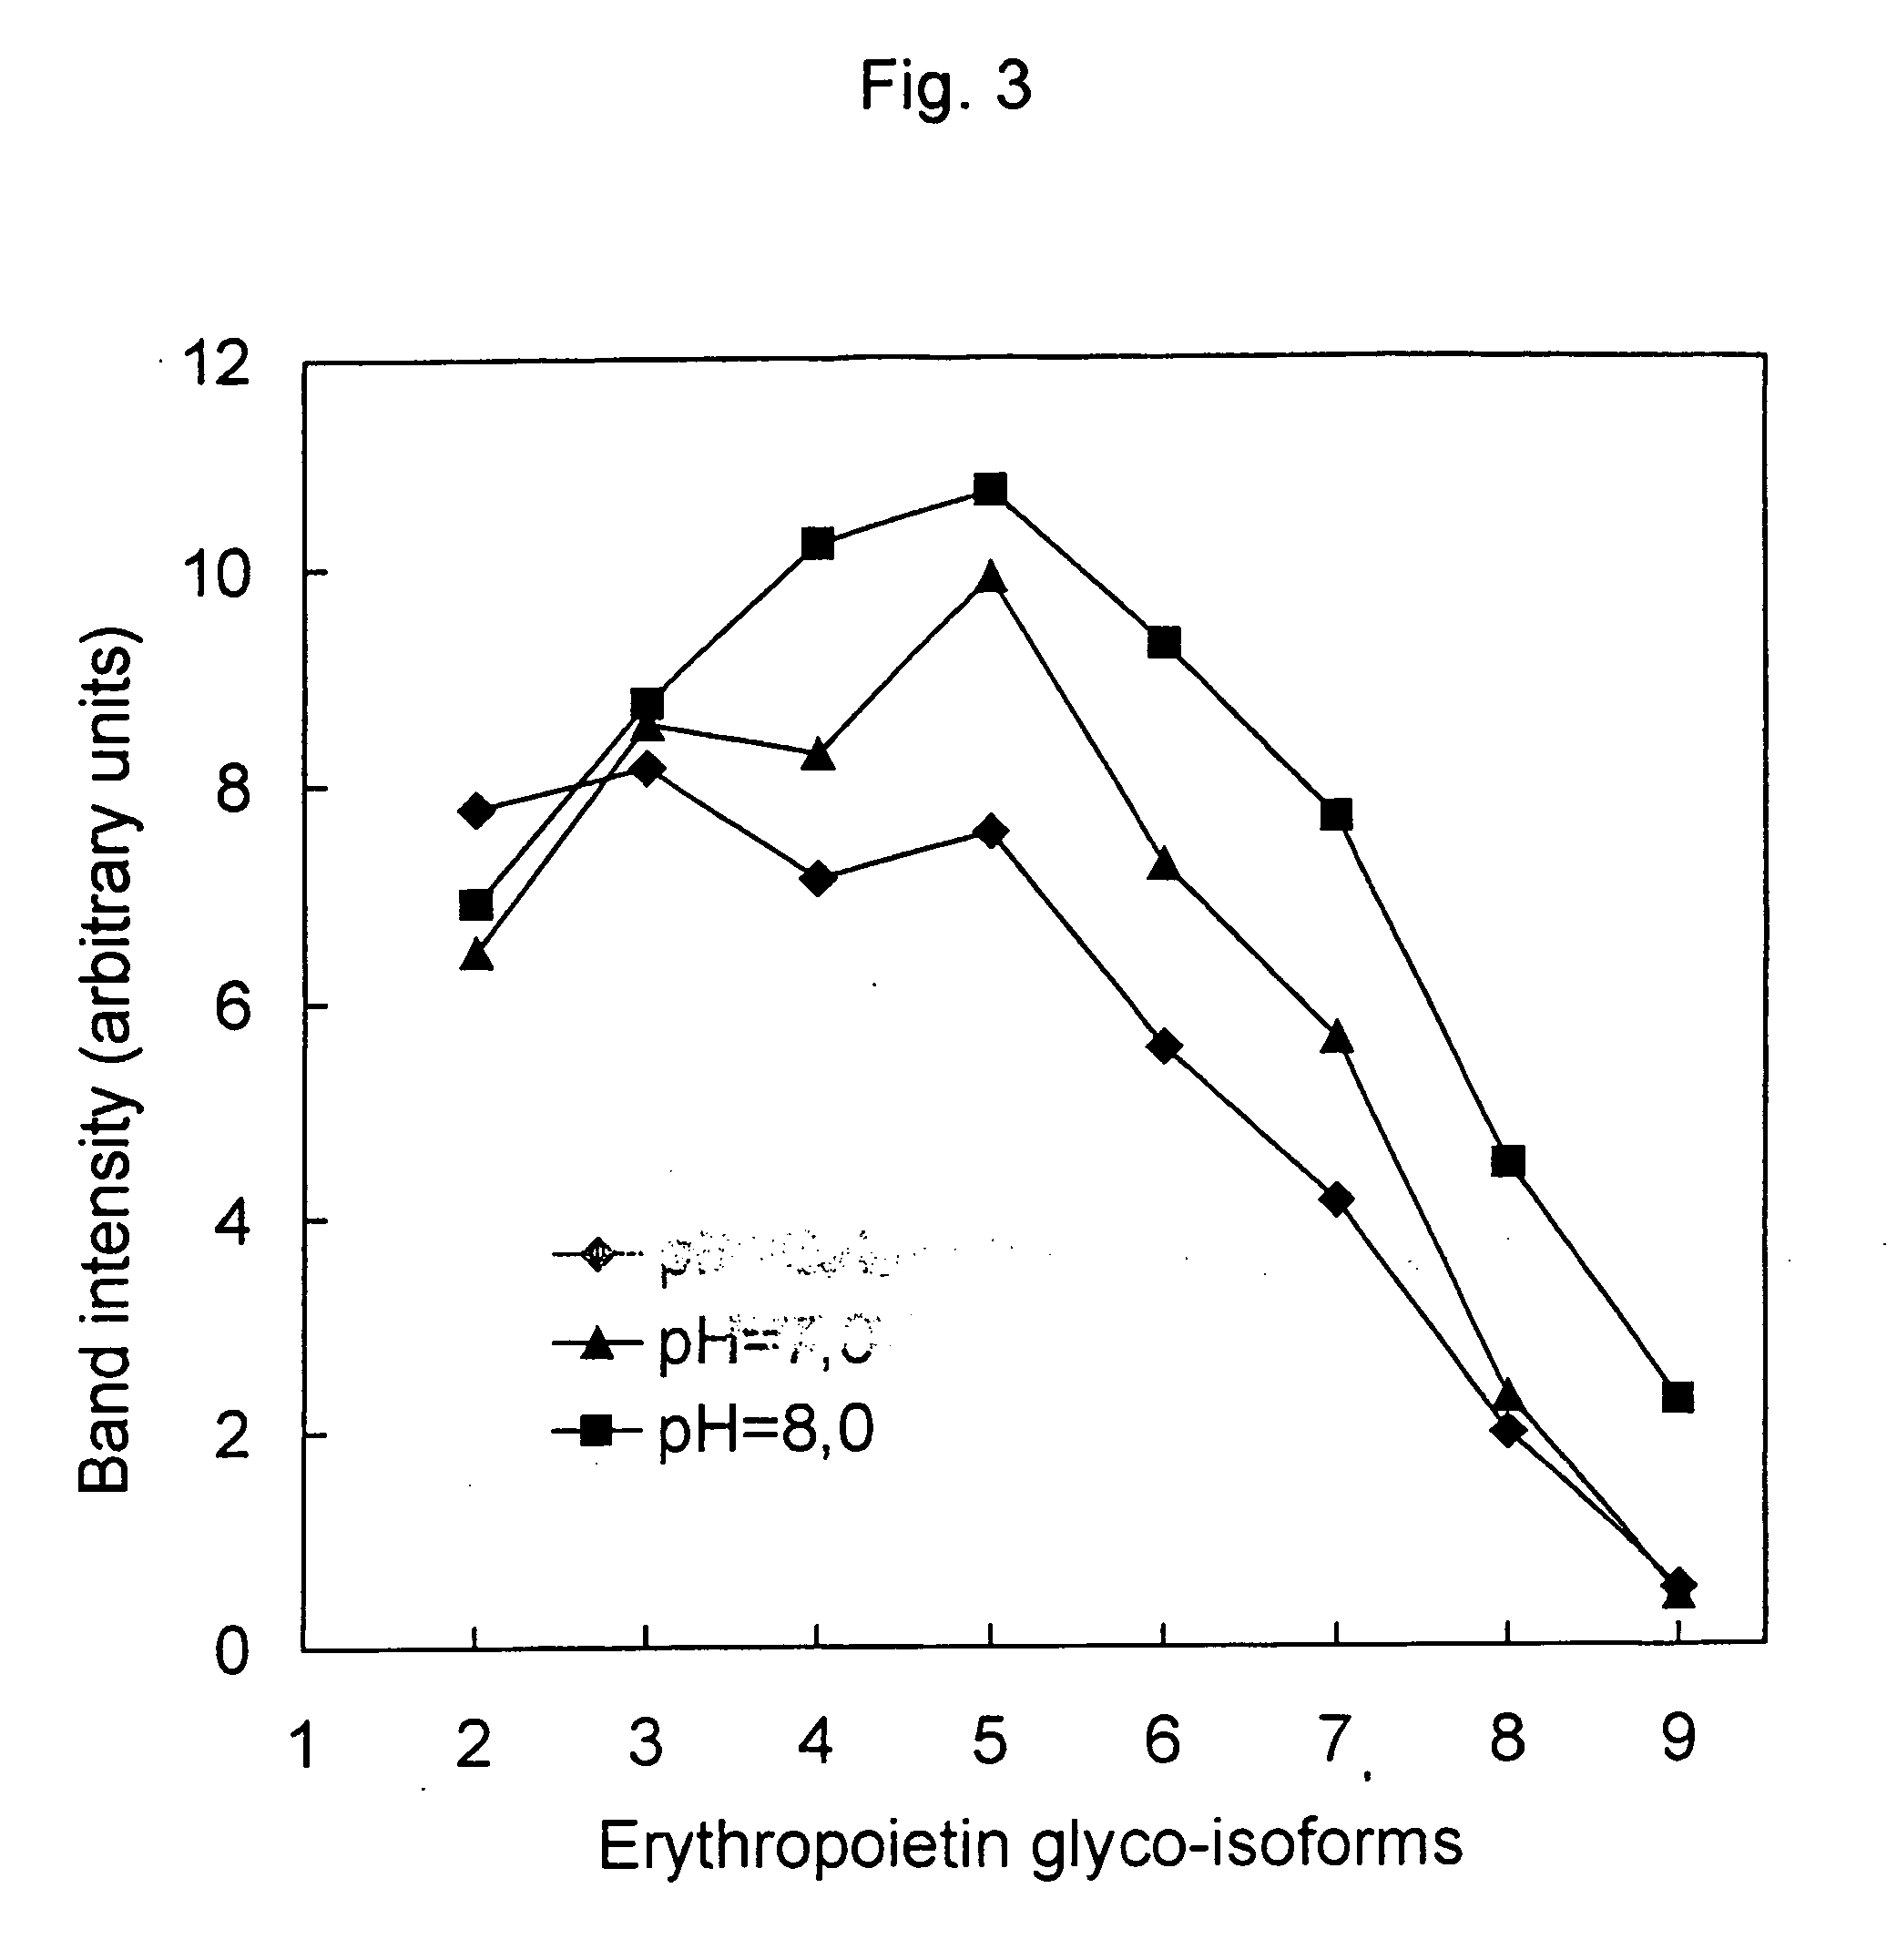 Process for the preparation of a desired erythropoietin glyco-isoform profile